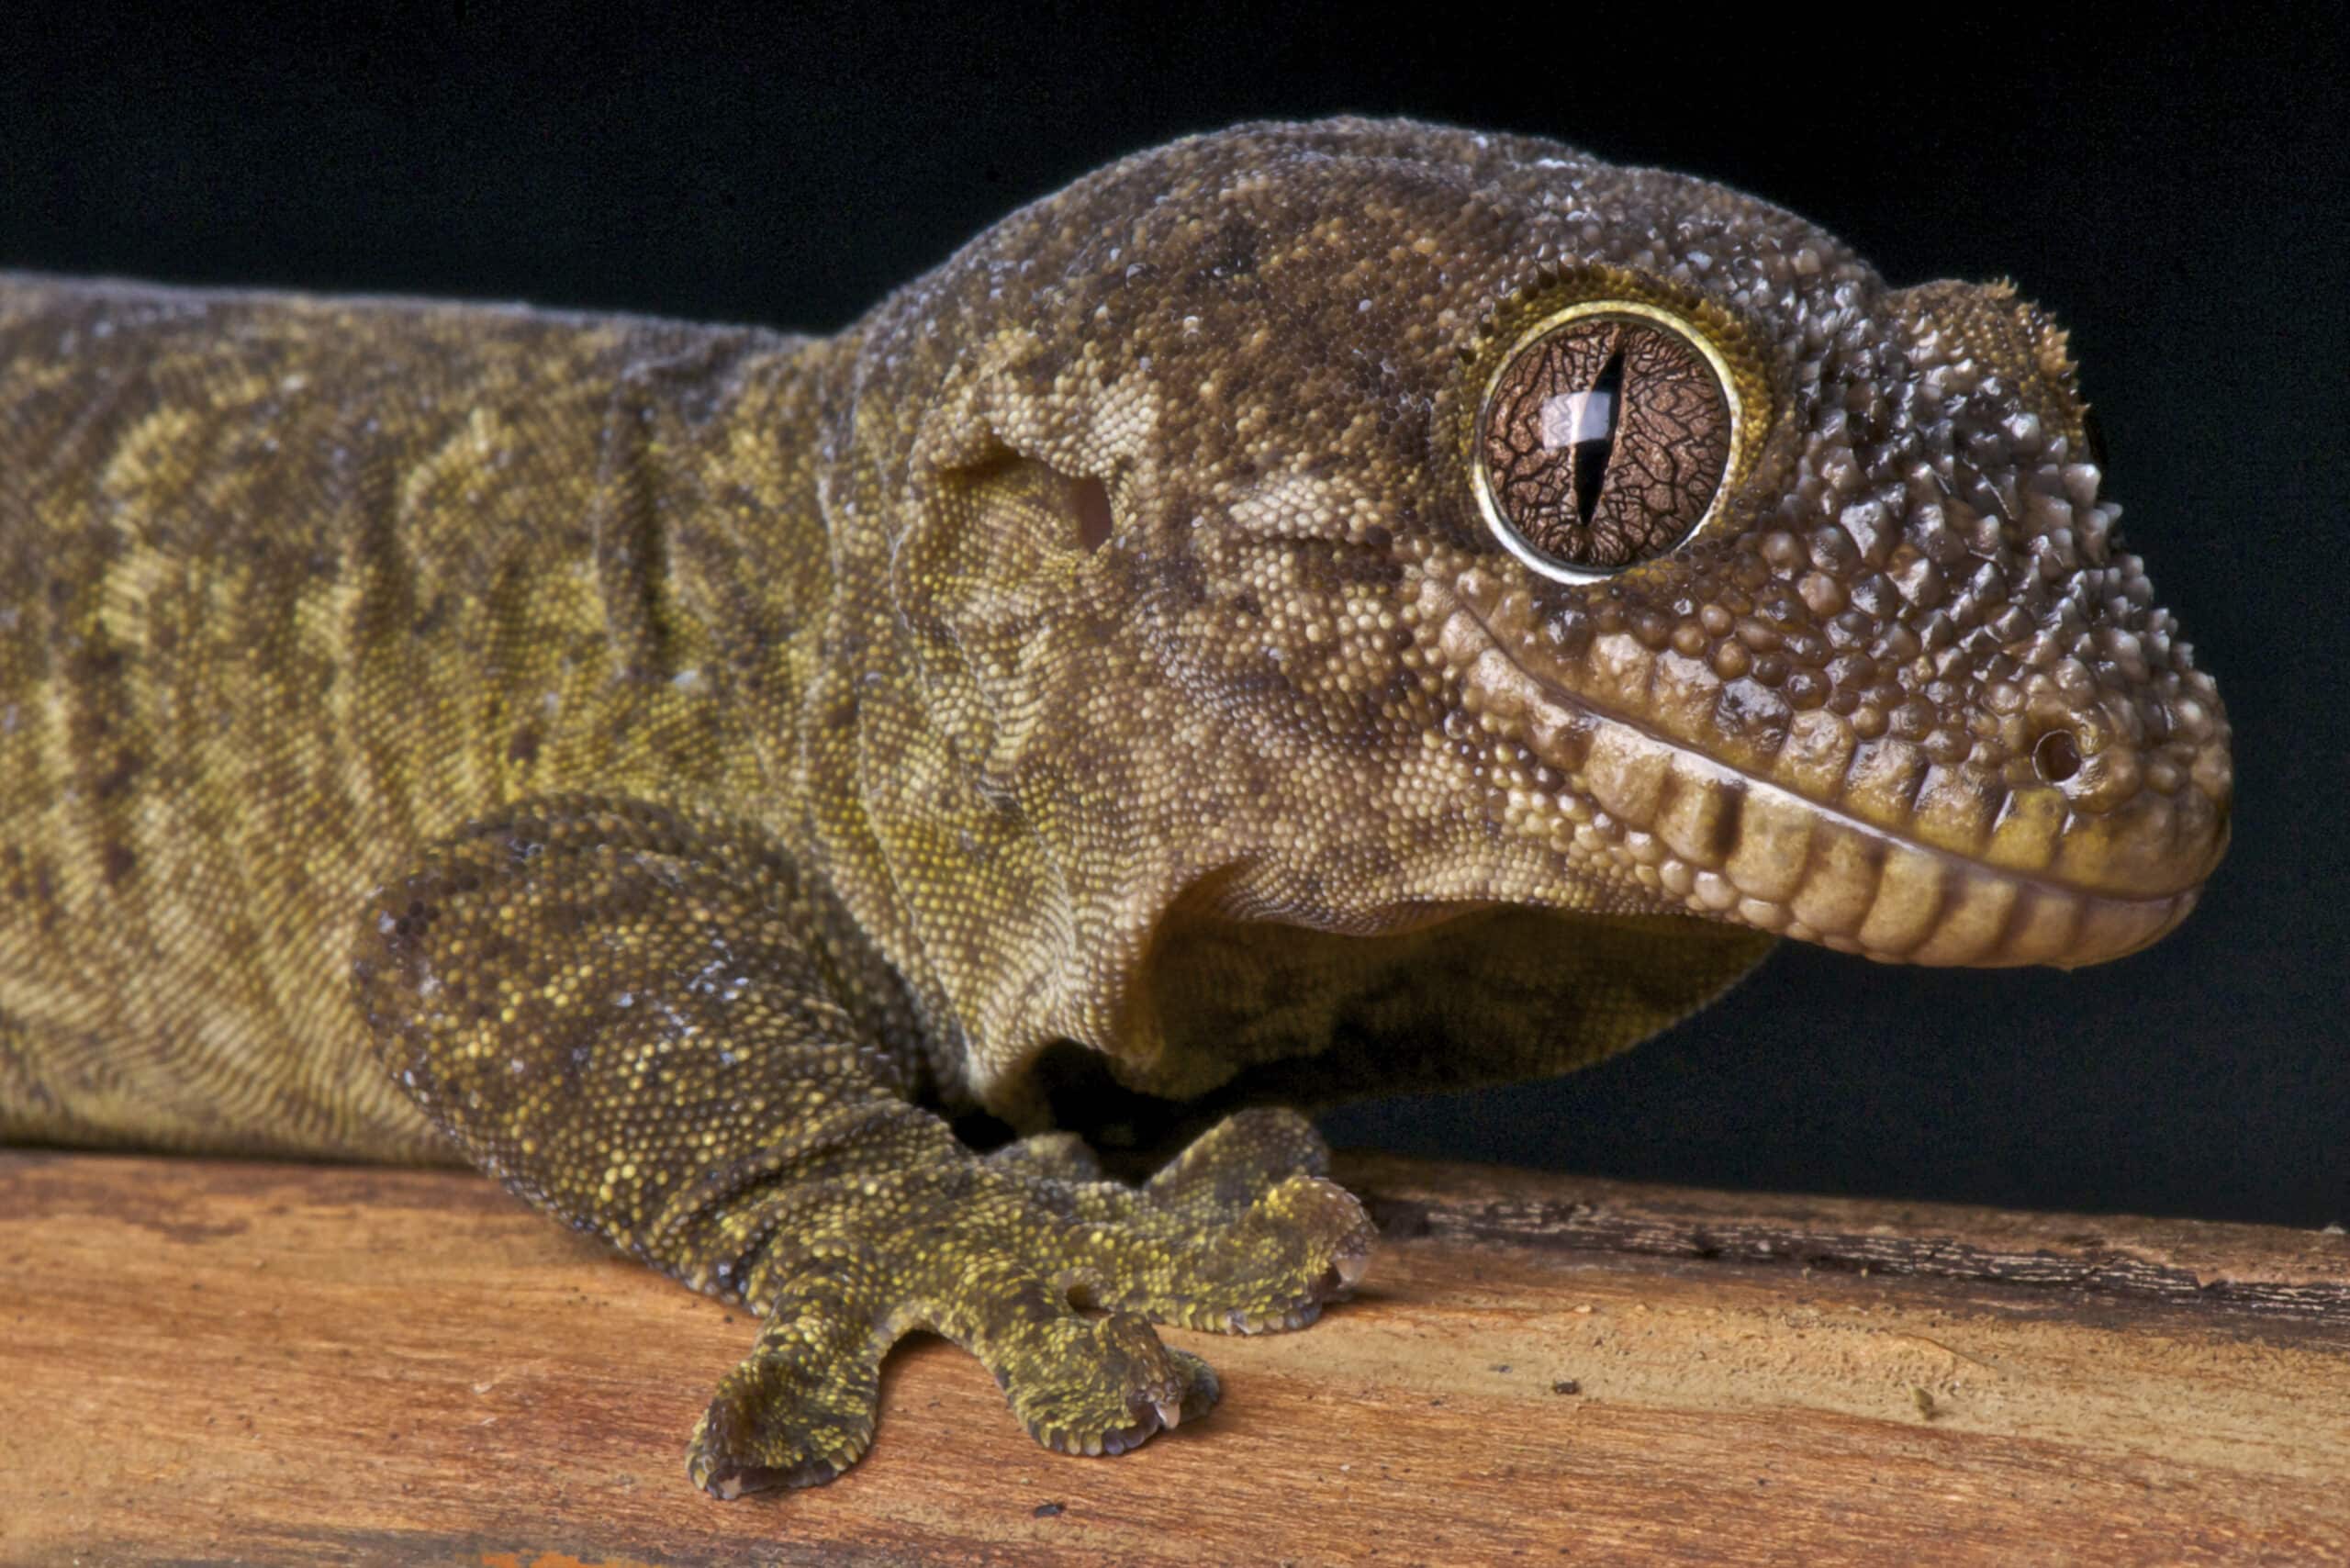 Rough-Snouted Gecko Breeding